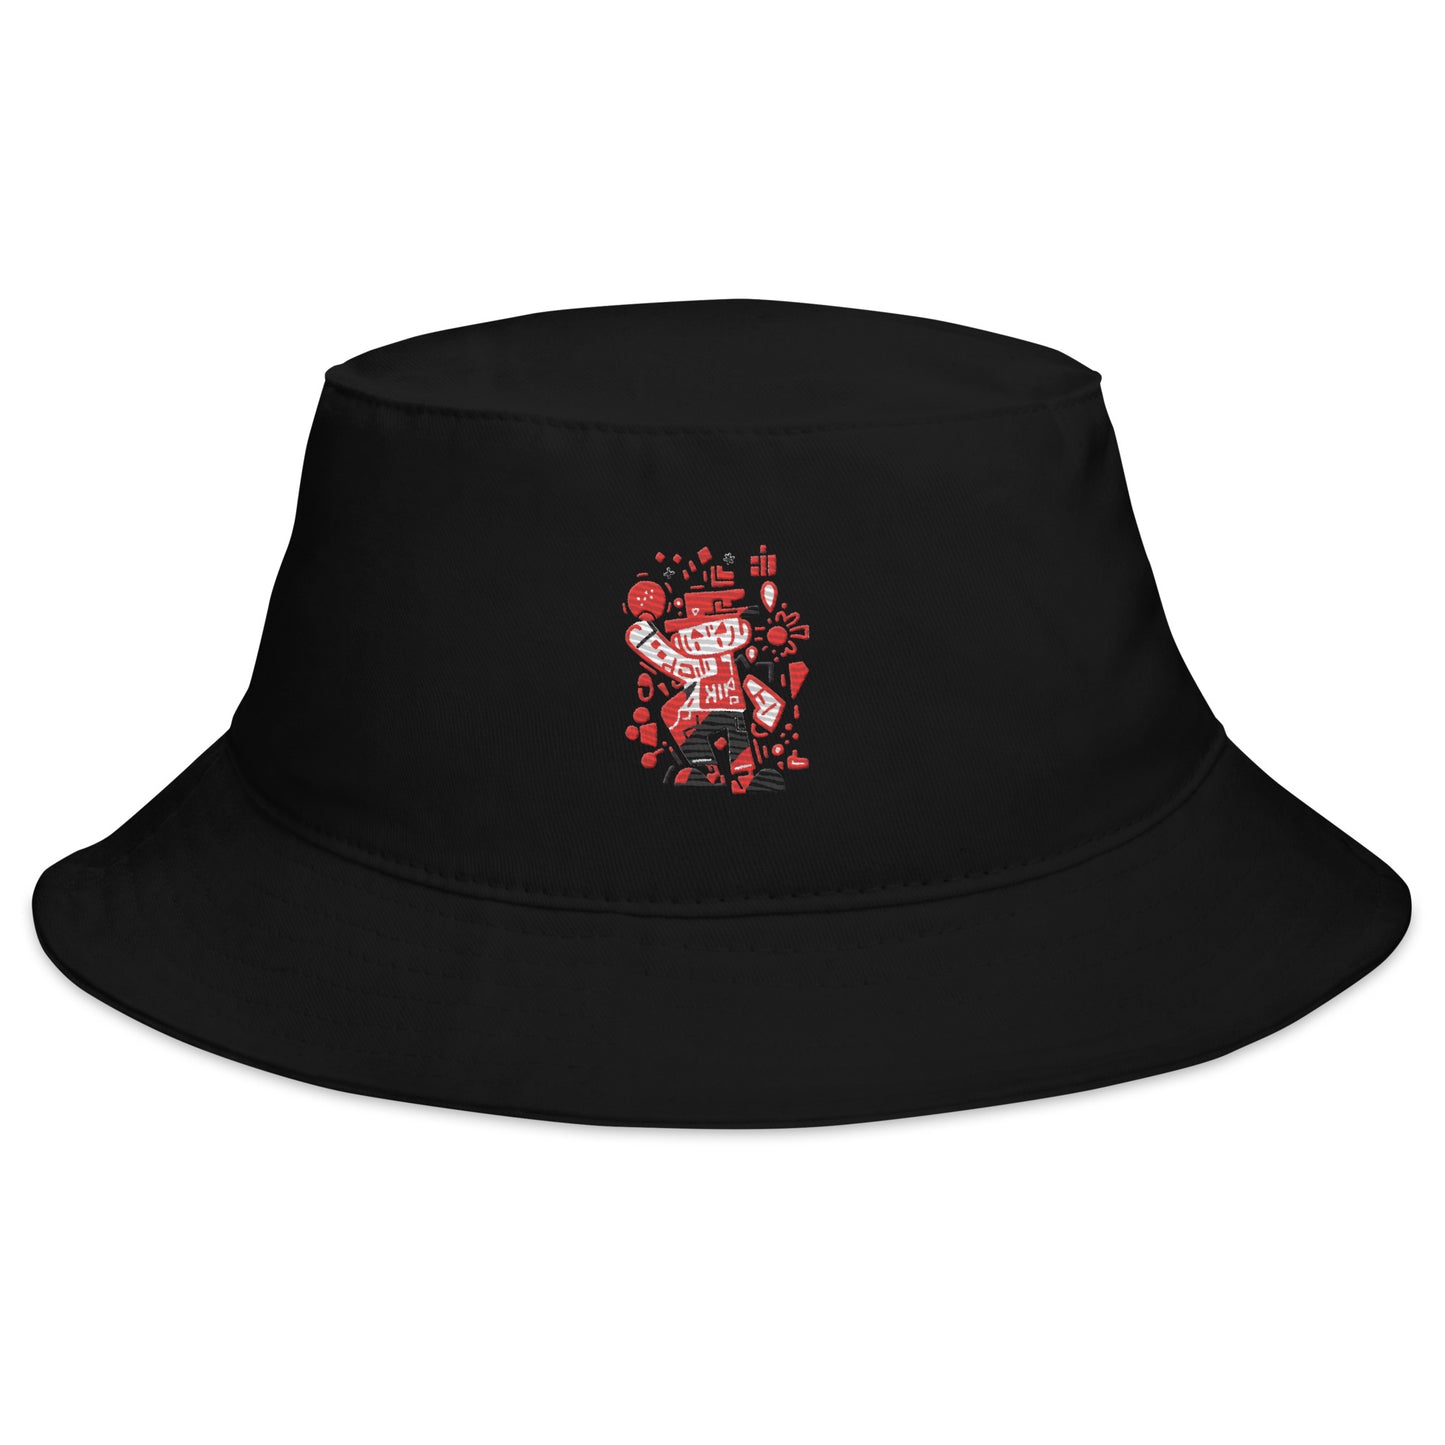 Doodles Me "Most Wanted" Bucket Hat #4